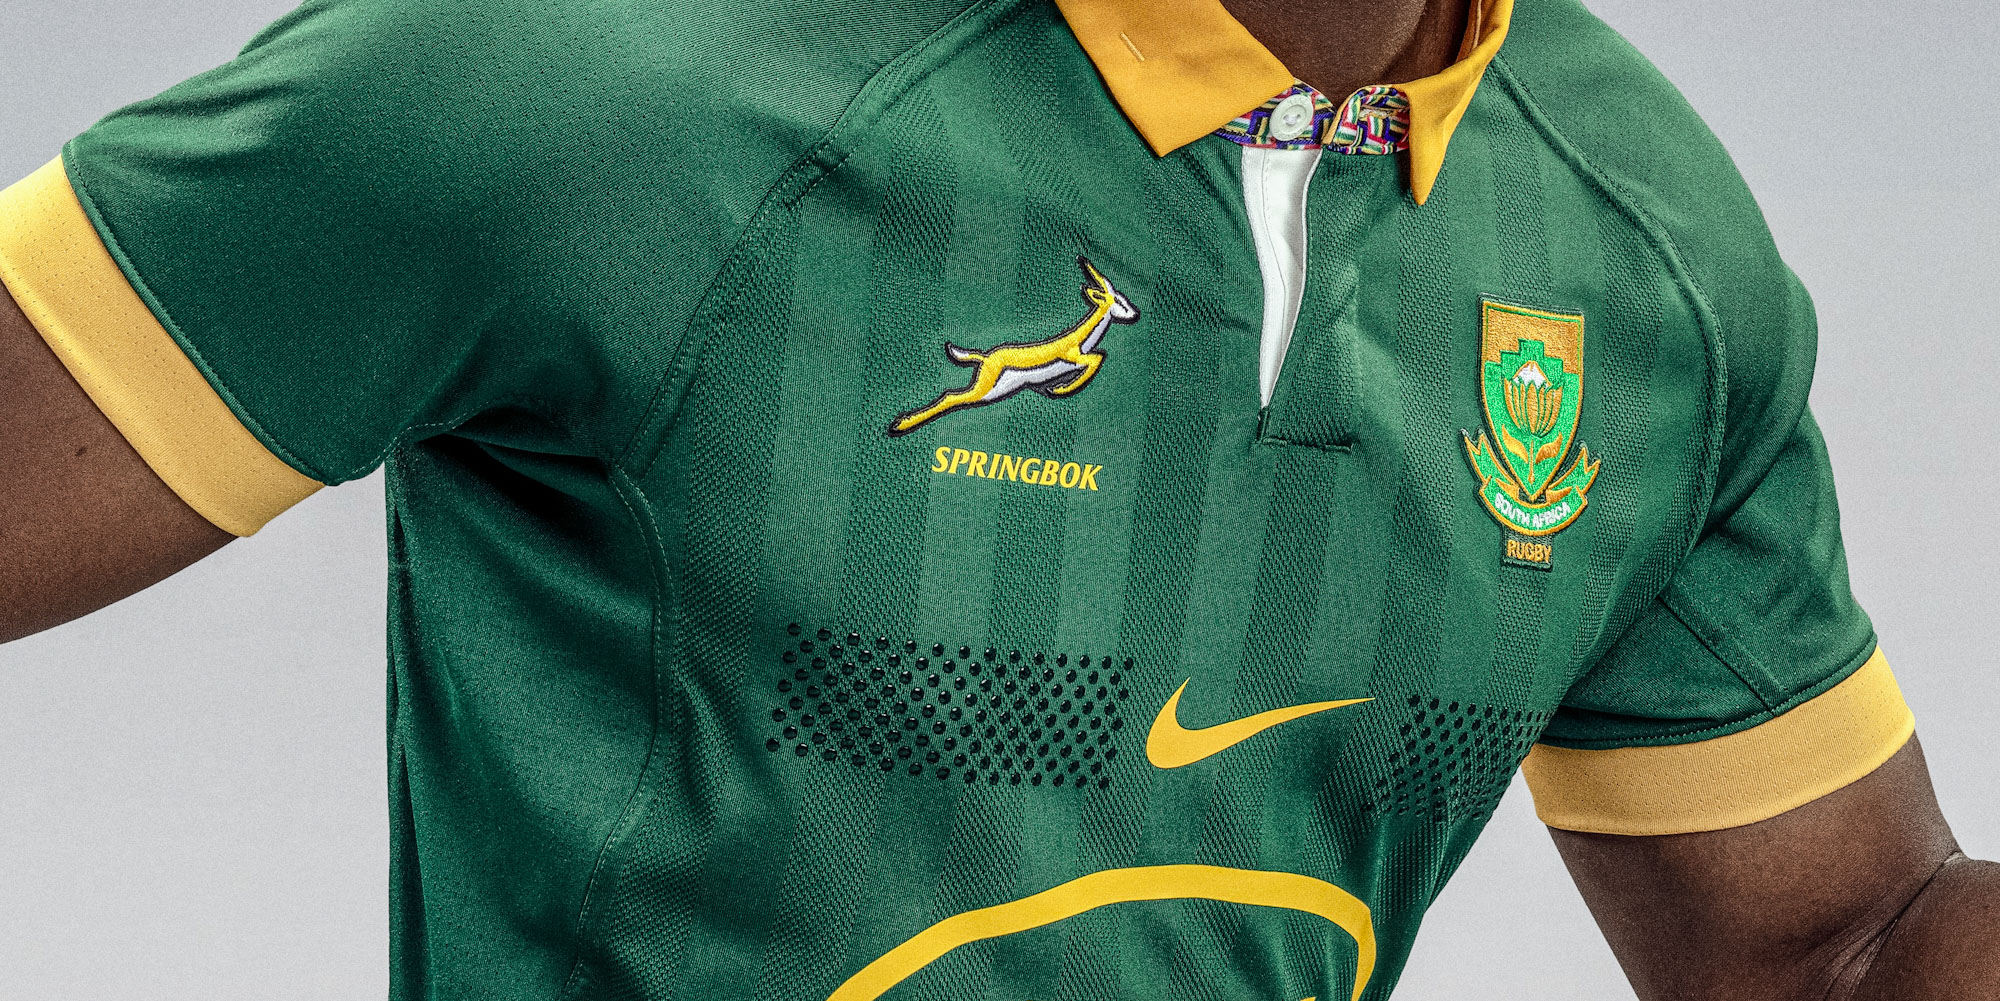 New Nike Springbok playing jersey revealed | SA Rugby